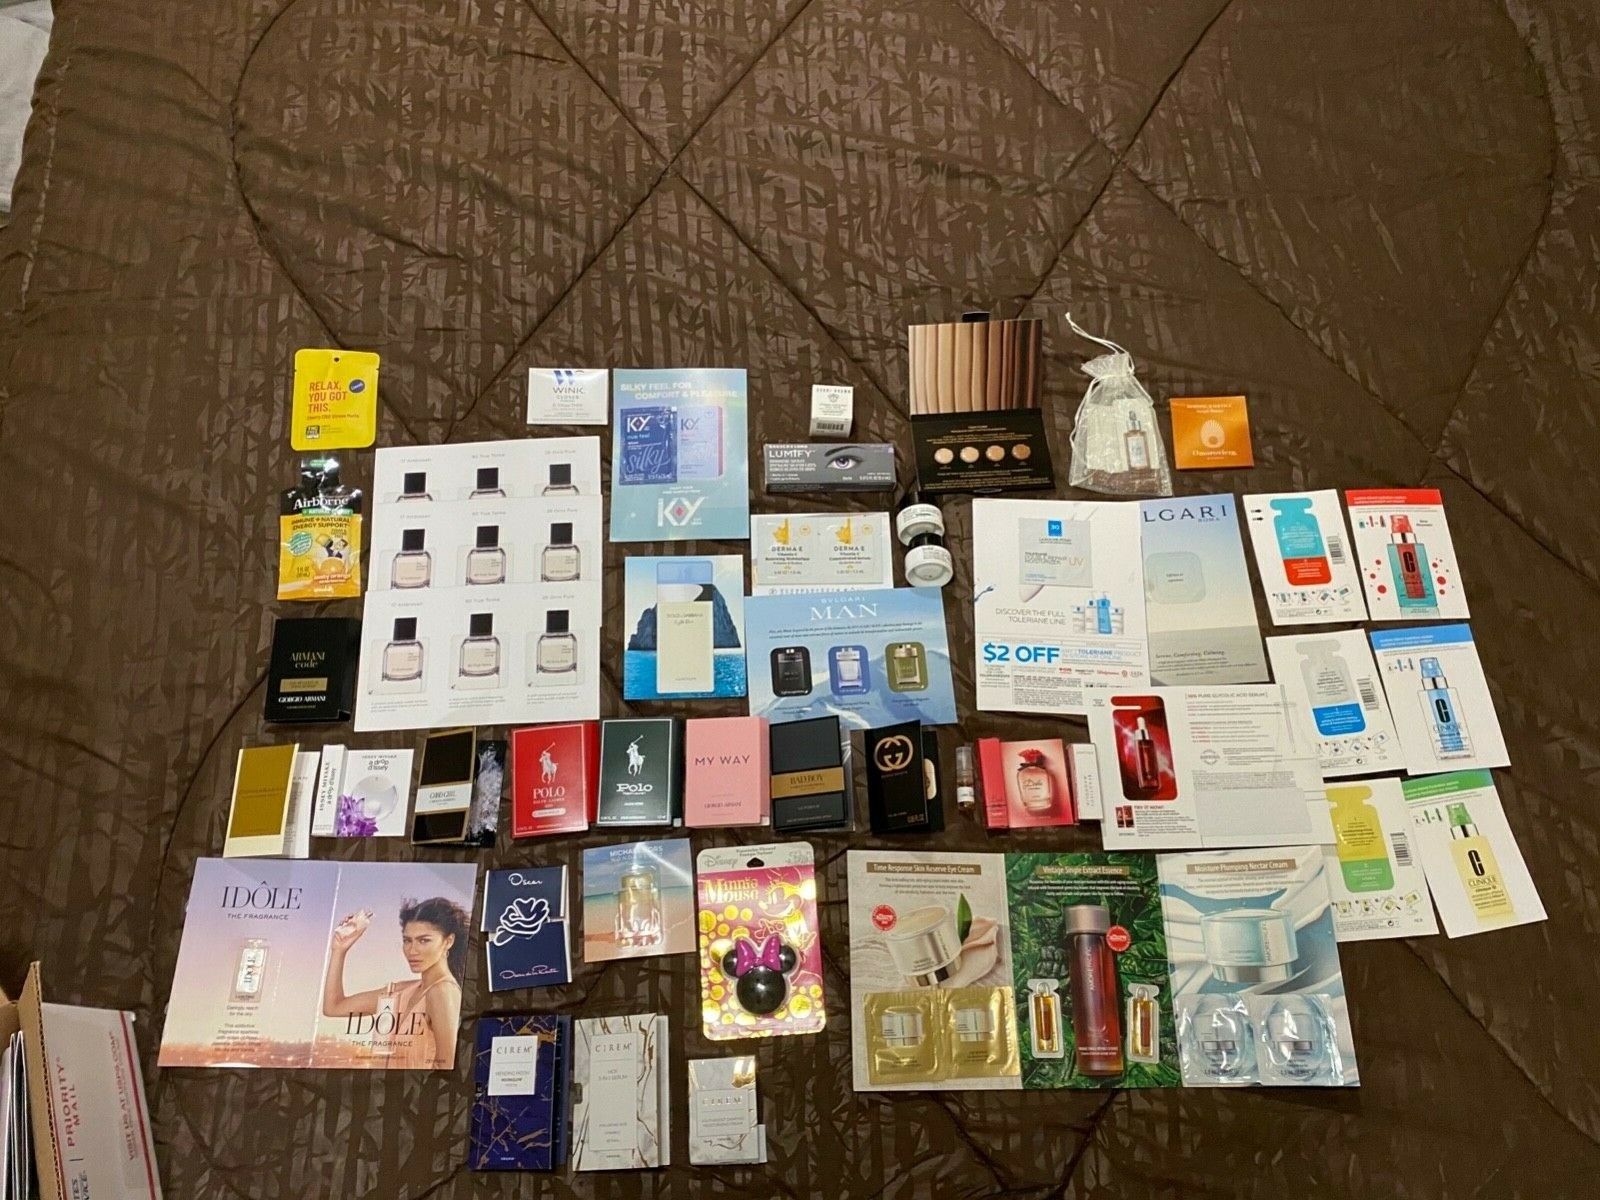 High End Samples Of Perfume-makeup & Skin Care Items-everything Seen In Picture!